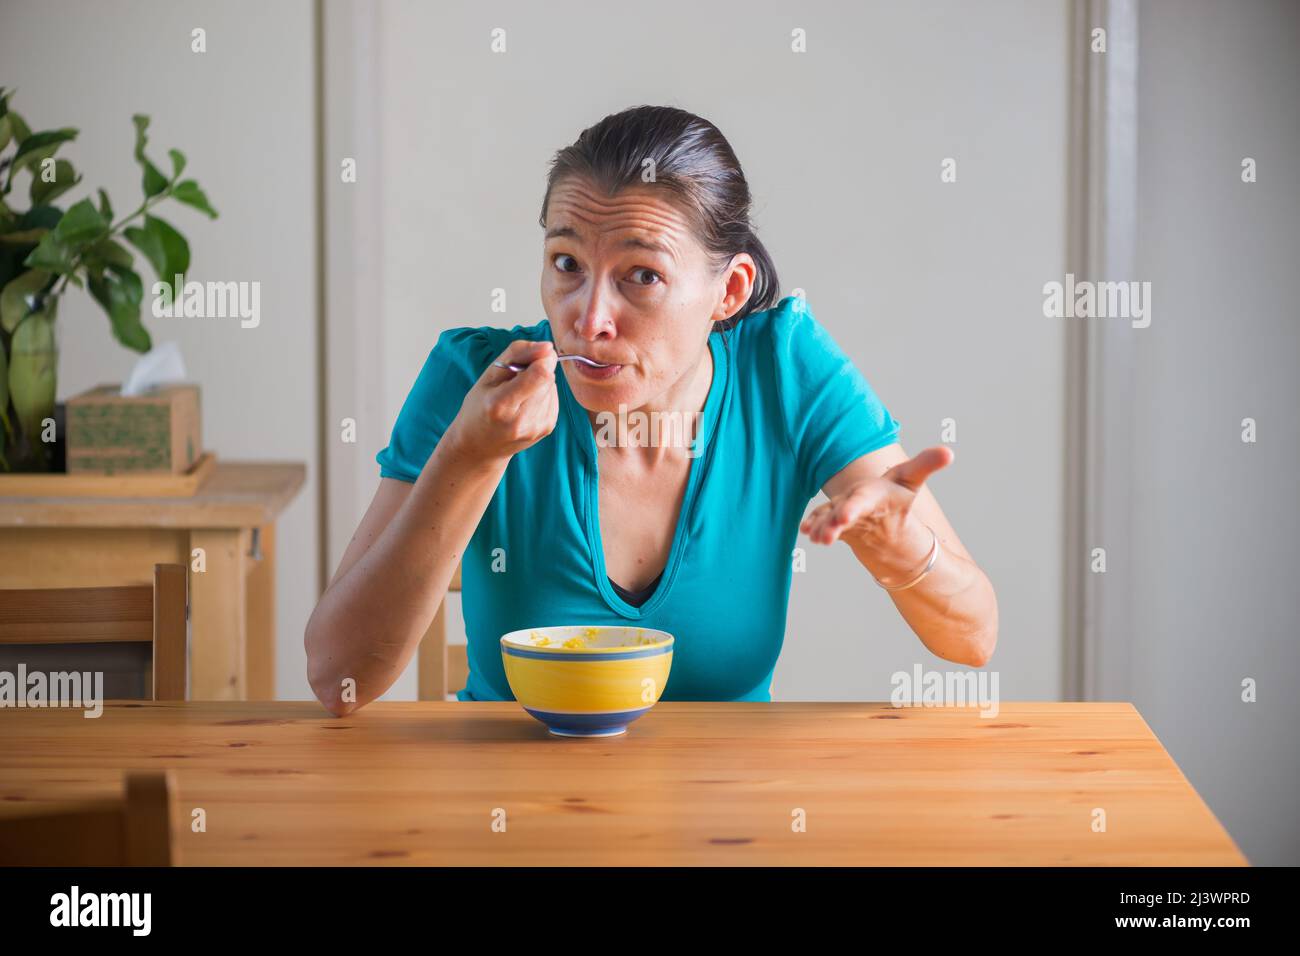 Woman eating kitchari for a breakfast and making funny faces. Indian cuisine. Lifestyle portrait. Stock Photo